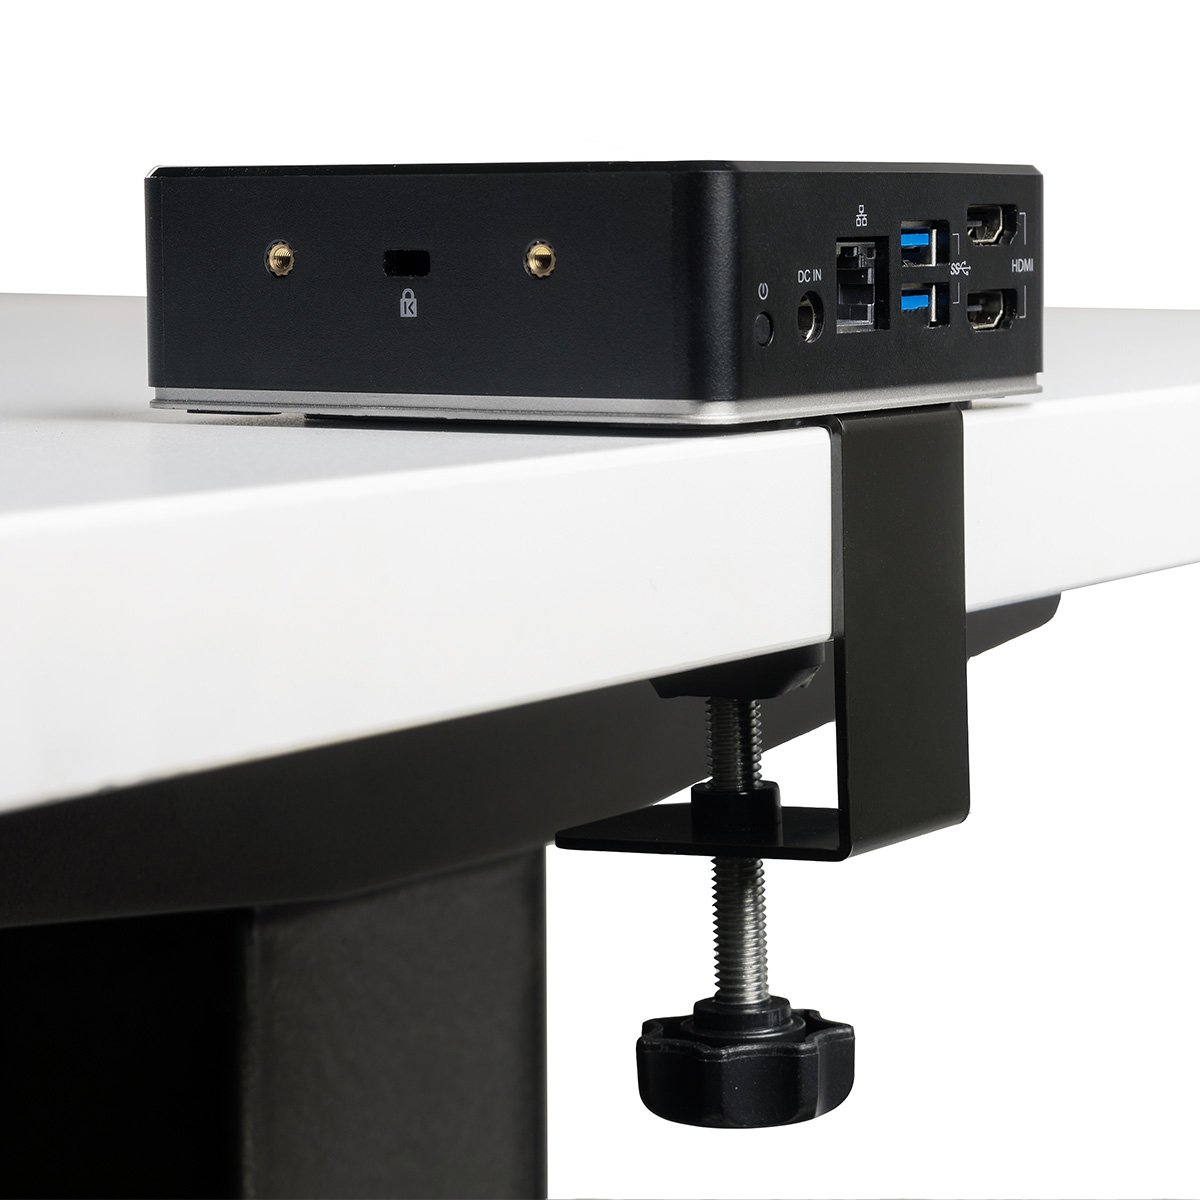 Docking Station with Clamp Mount on Desk